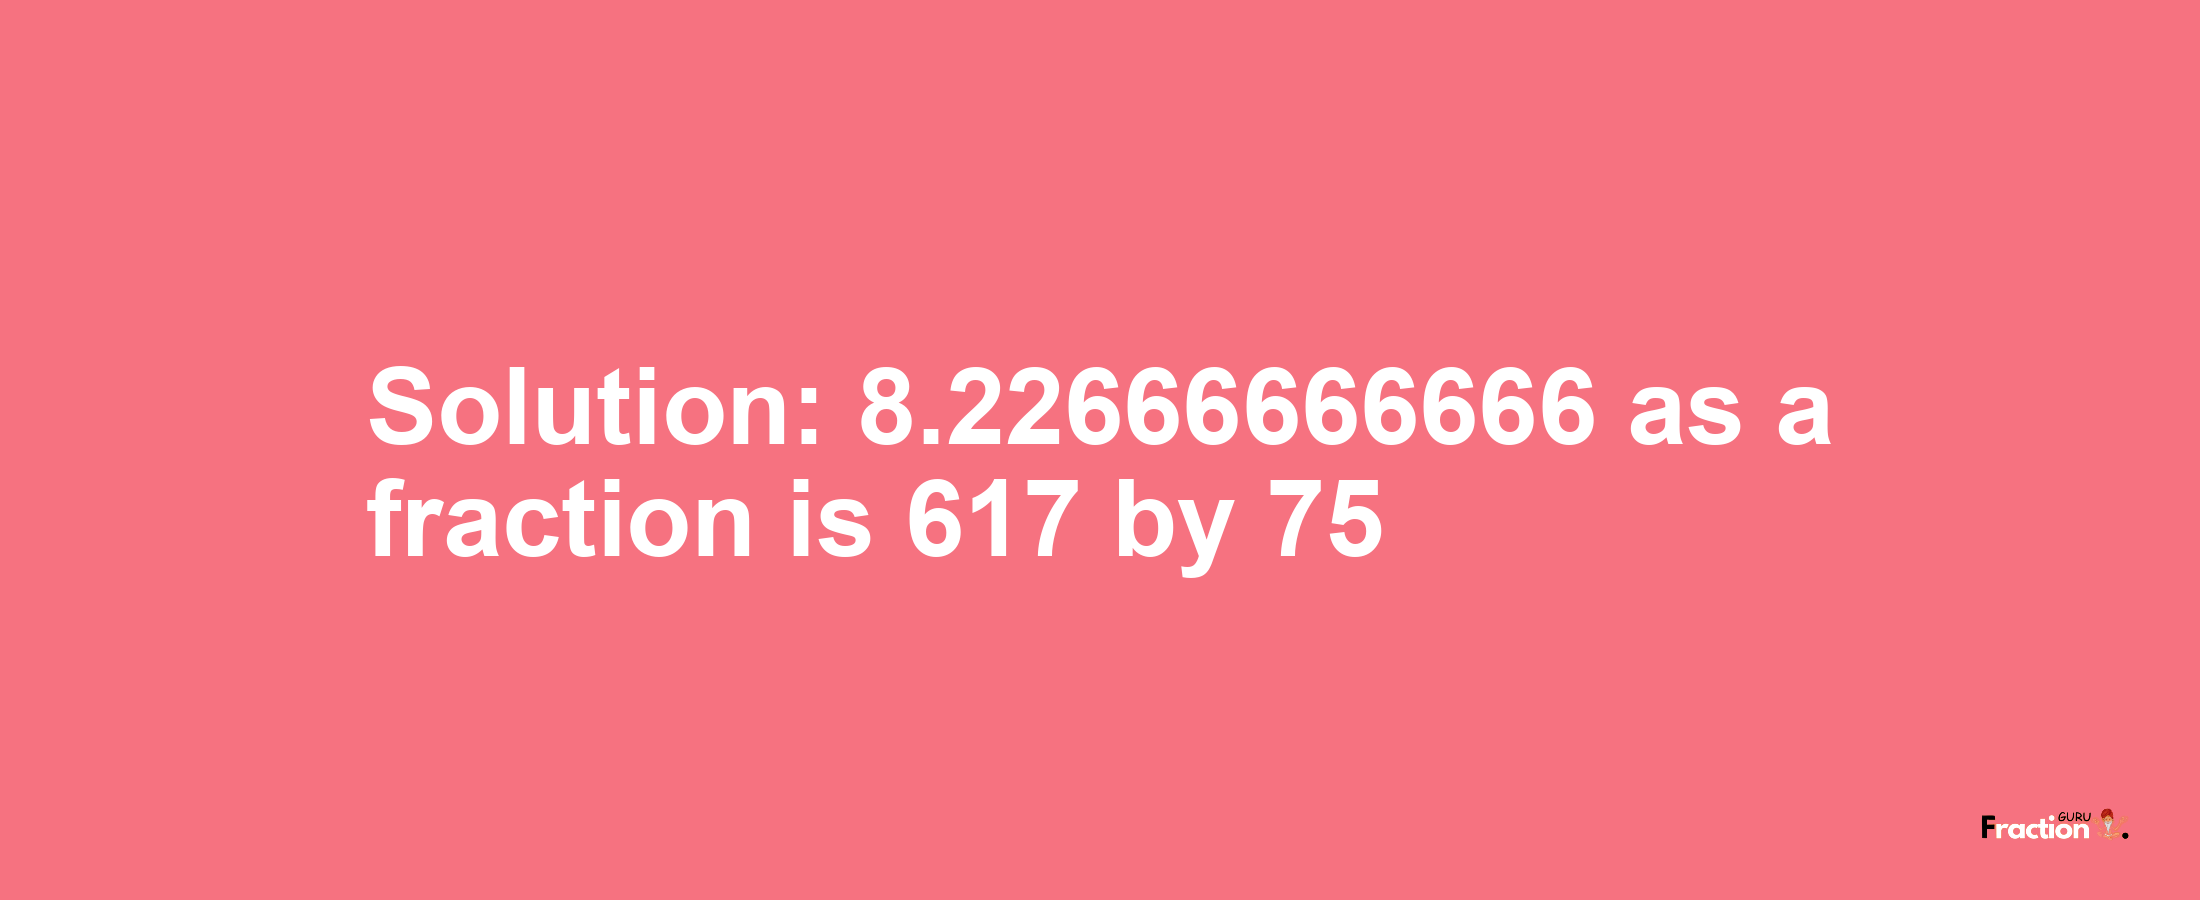 Solution:8.22666666666 as a fraction is 617/75